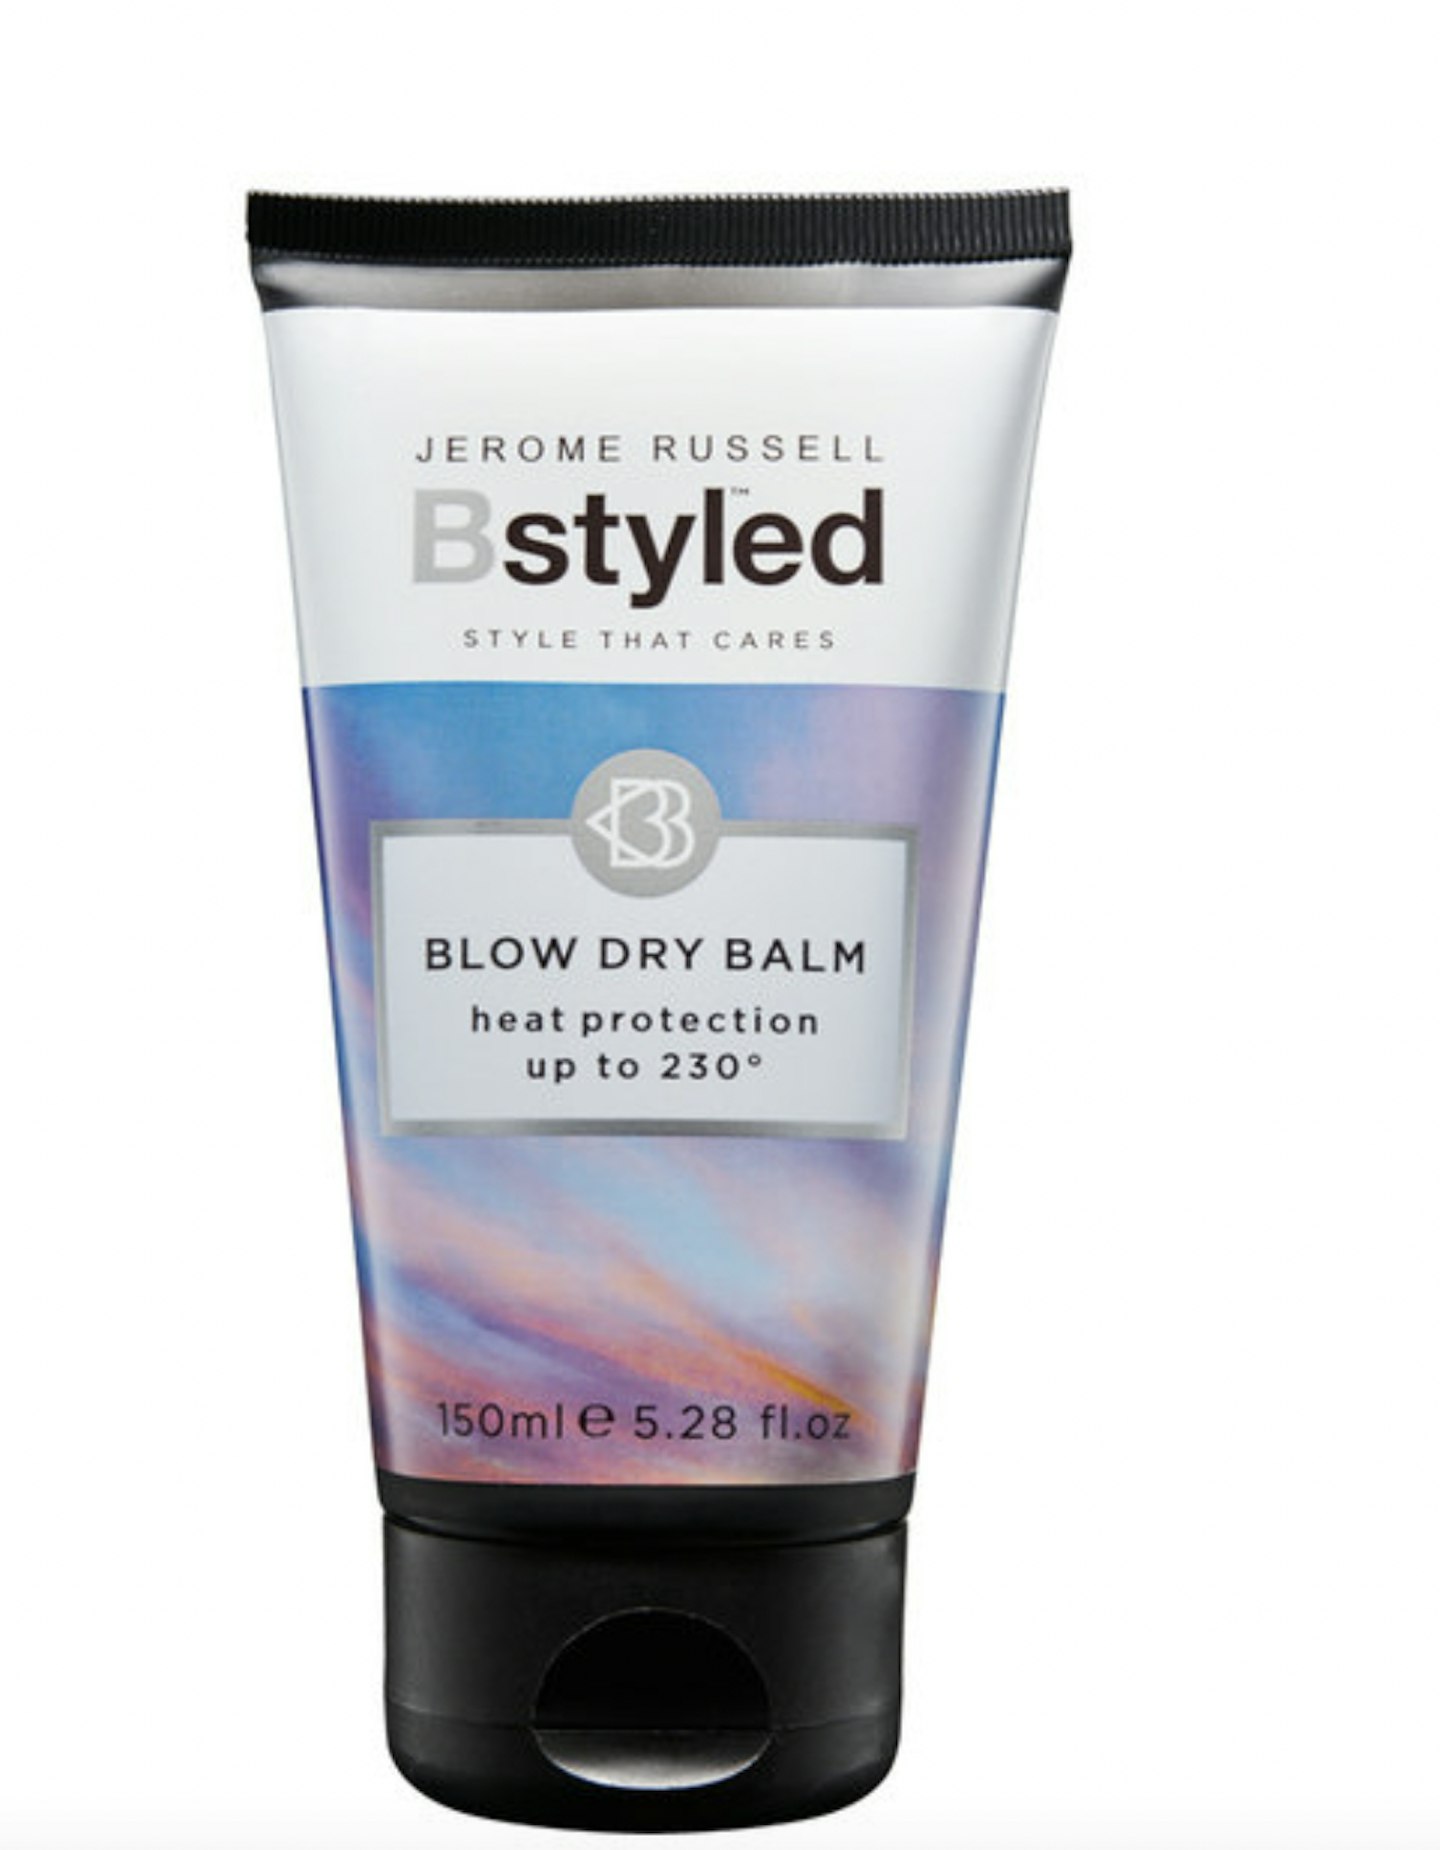 Jerome Russell Bstyled Blow Dry Balm, £6.99